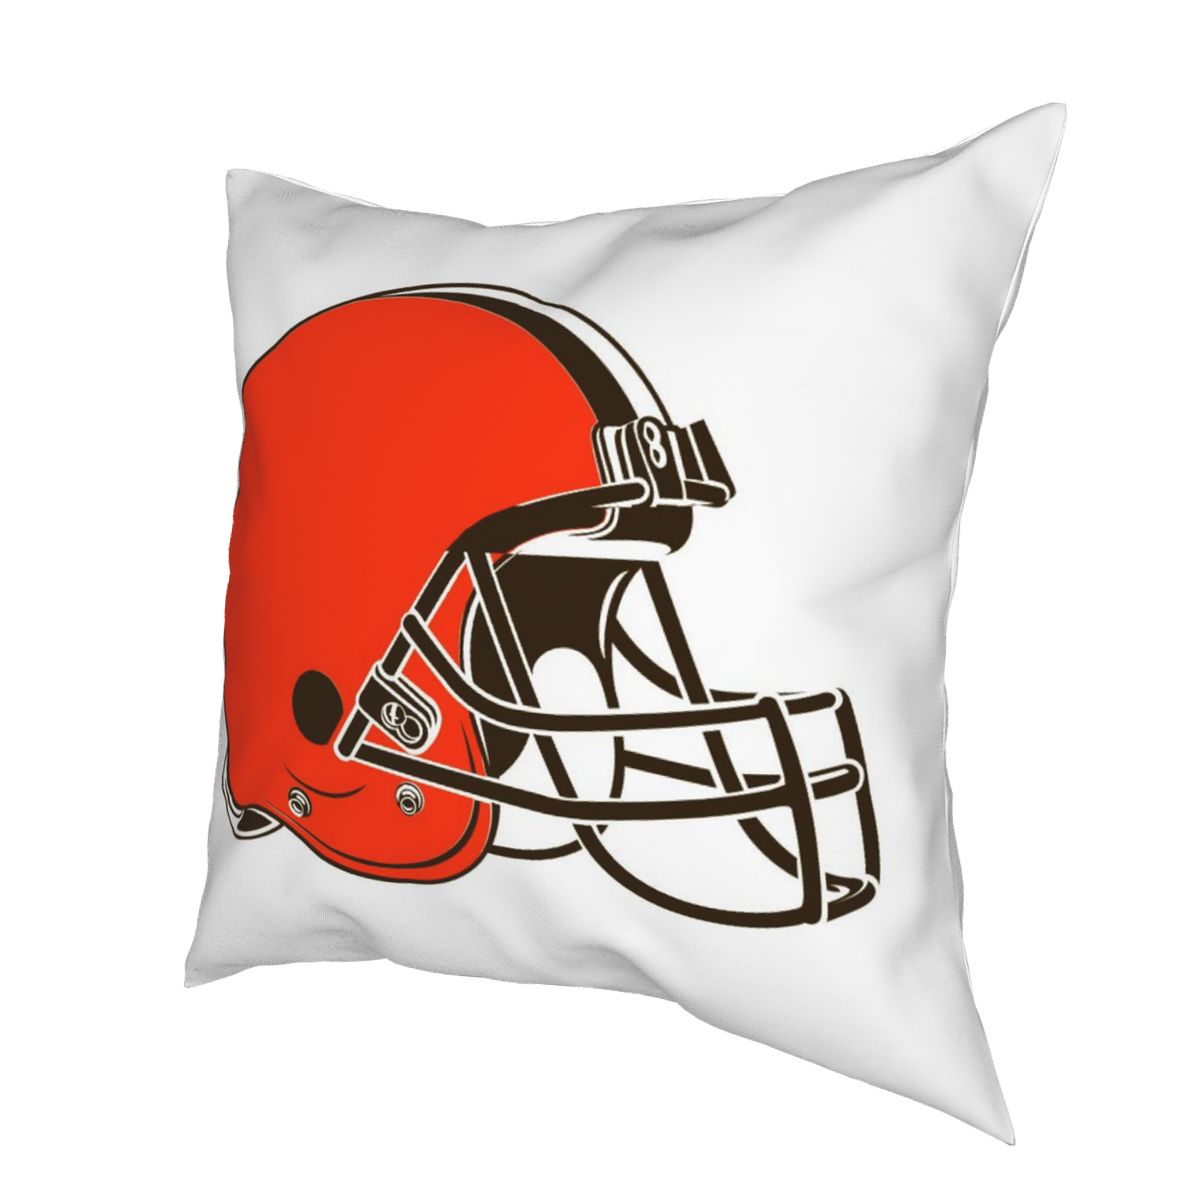 Custom Decorative Football Pillow Case Cleveland Browns White Pillowcase Personalized Throw Pillow Covers